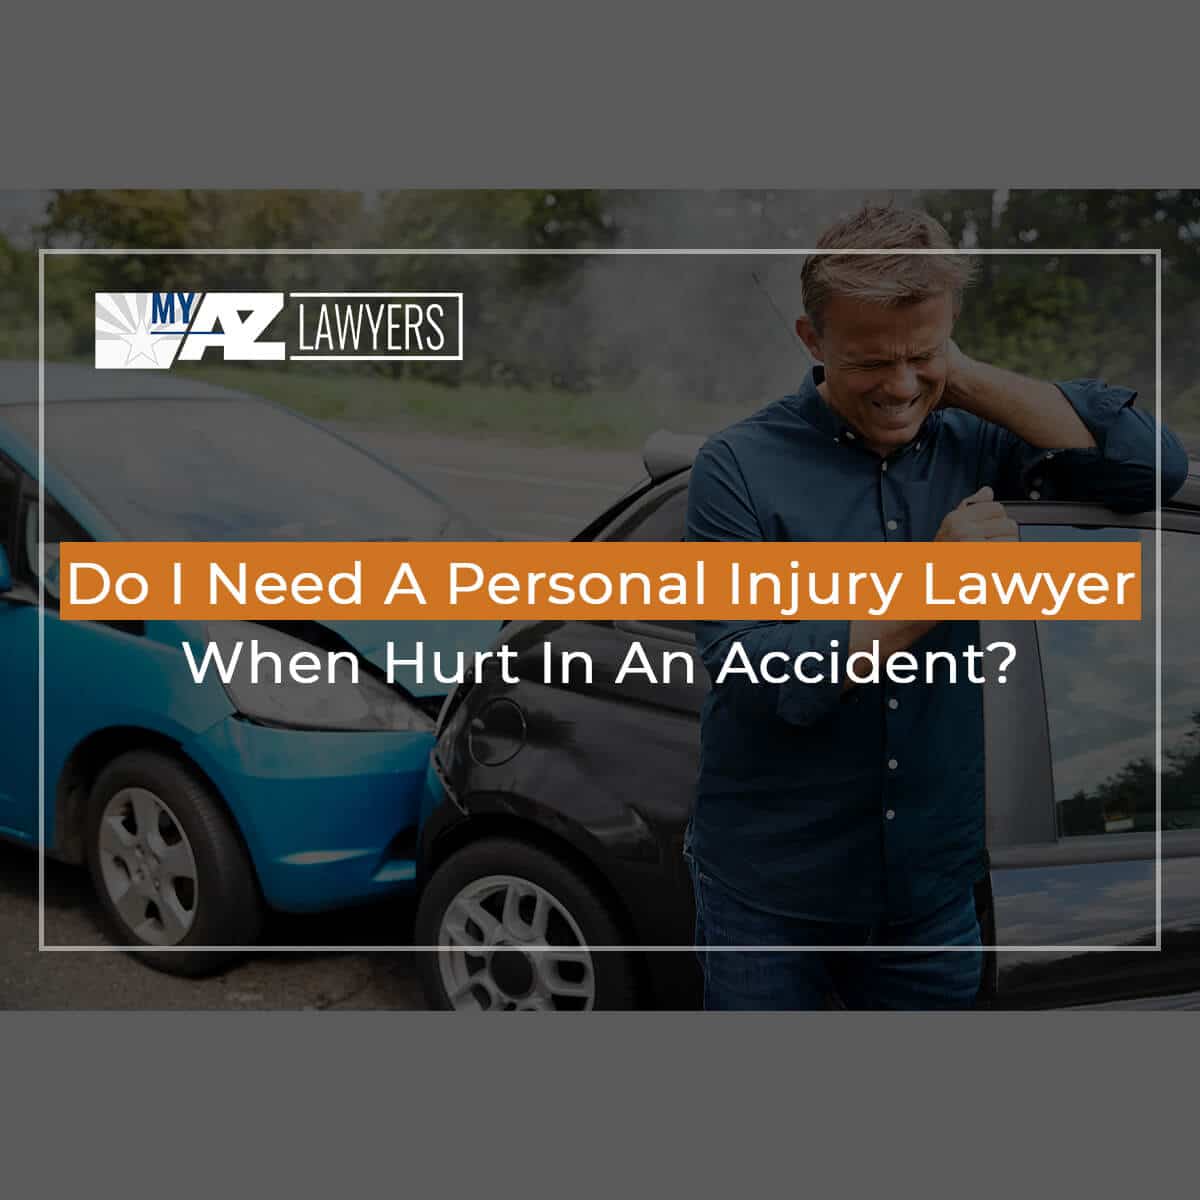 Do I Need A Personal Injury Lawyer When Hurt In An Accident?